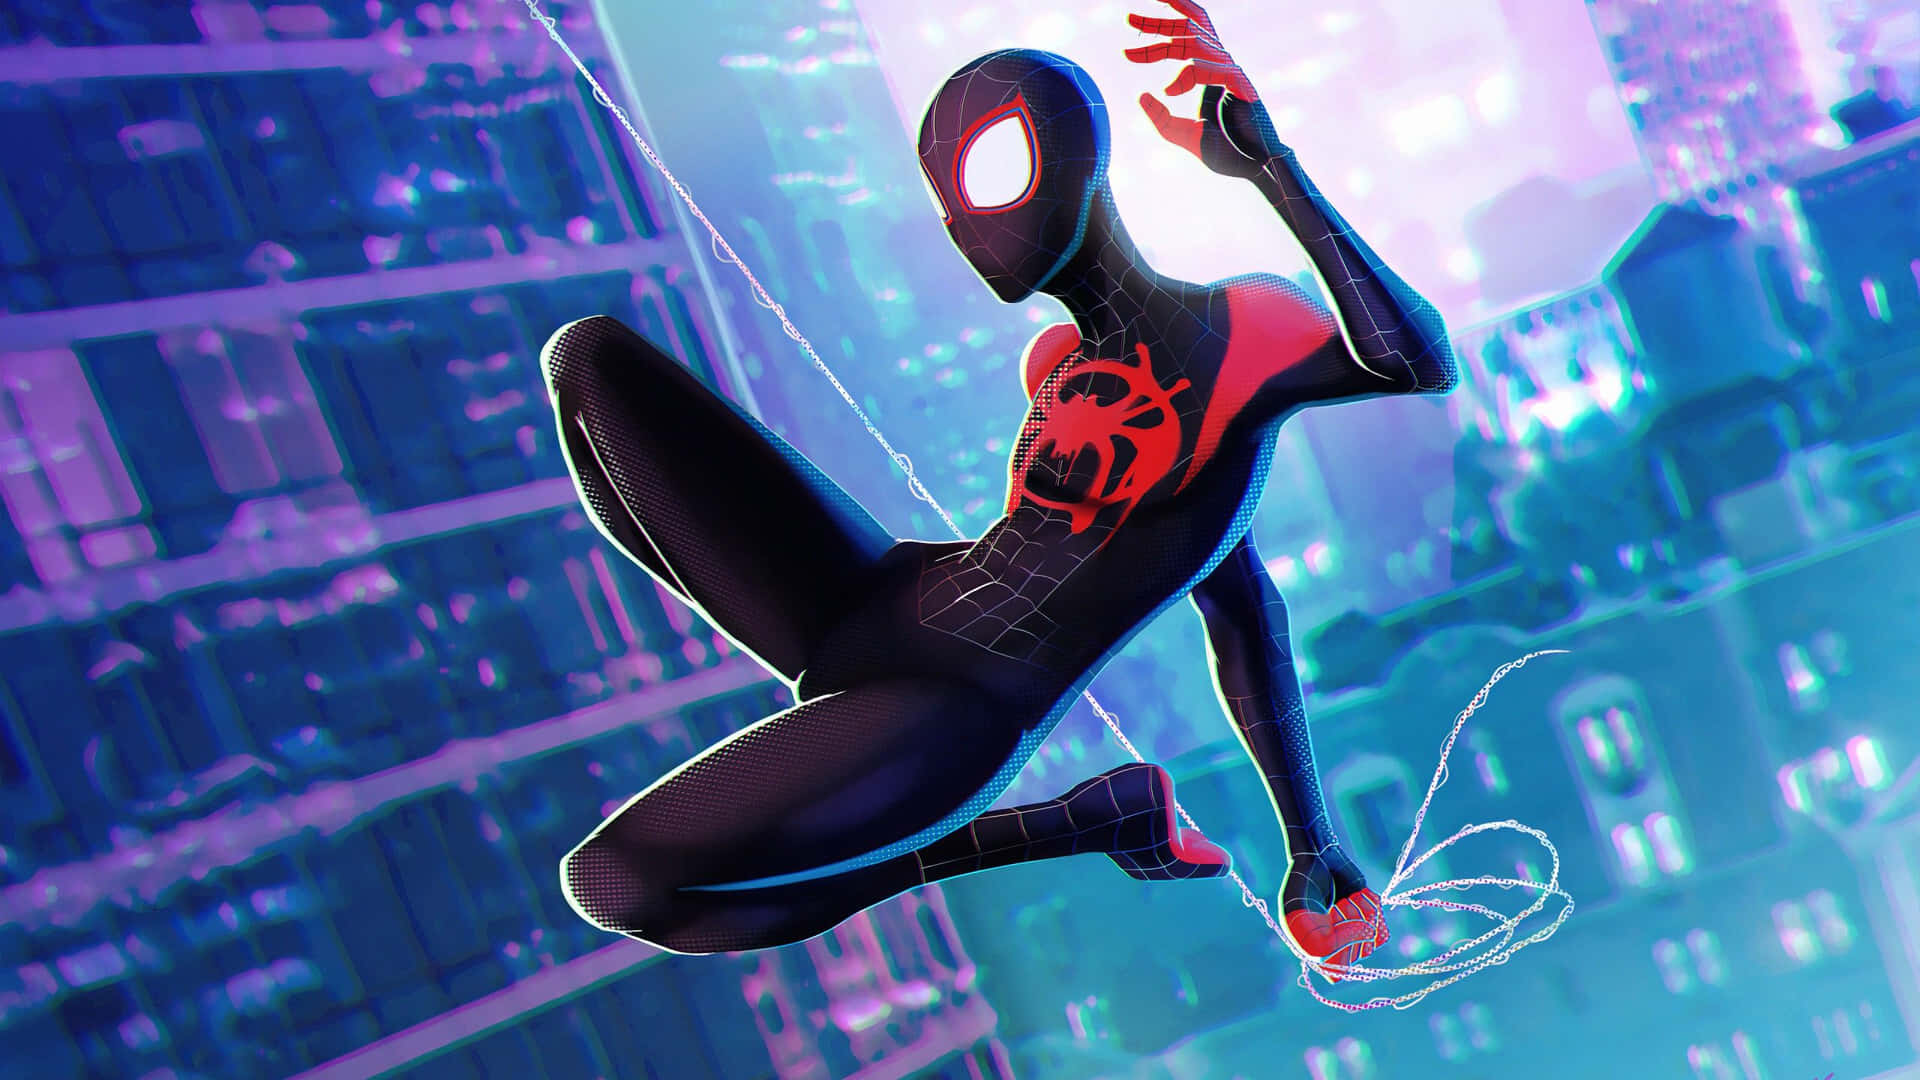 Spider Man, Miles Morales and Spider Gwen in 4K Wallpaper